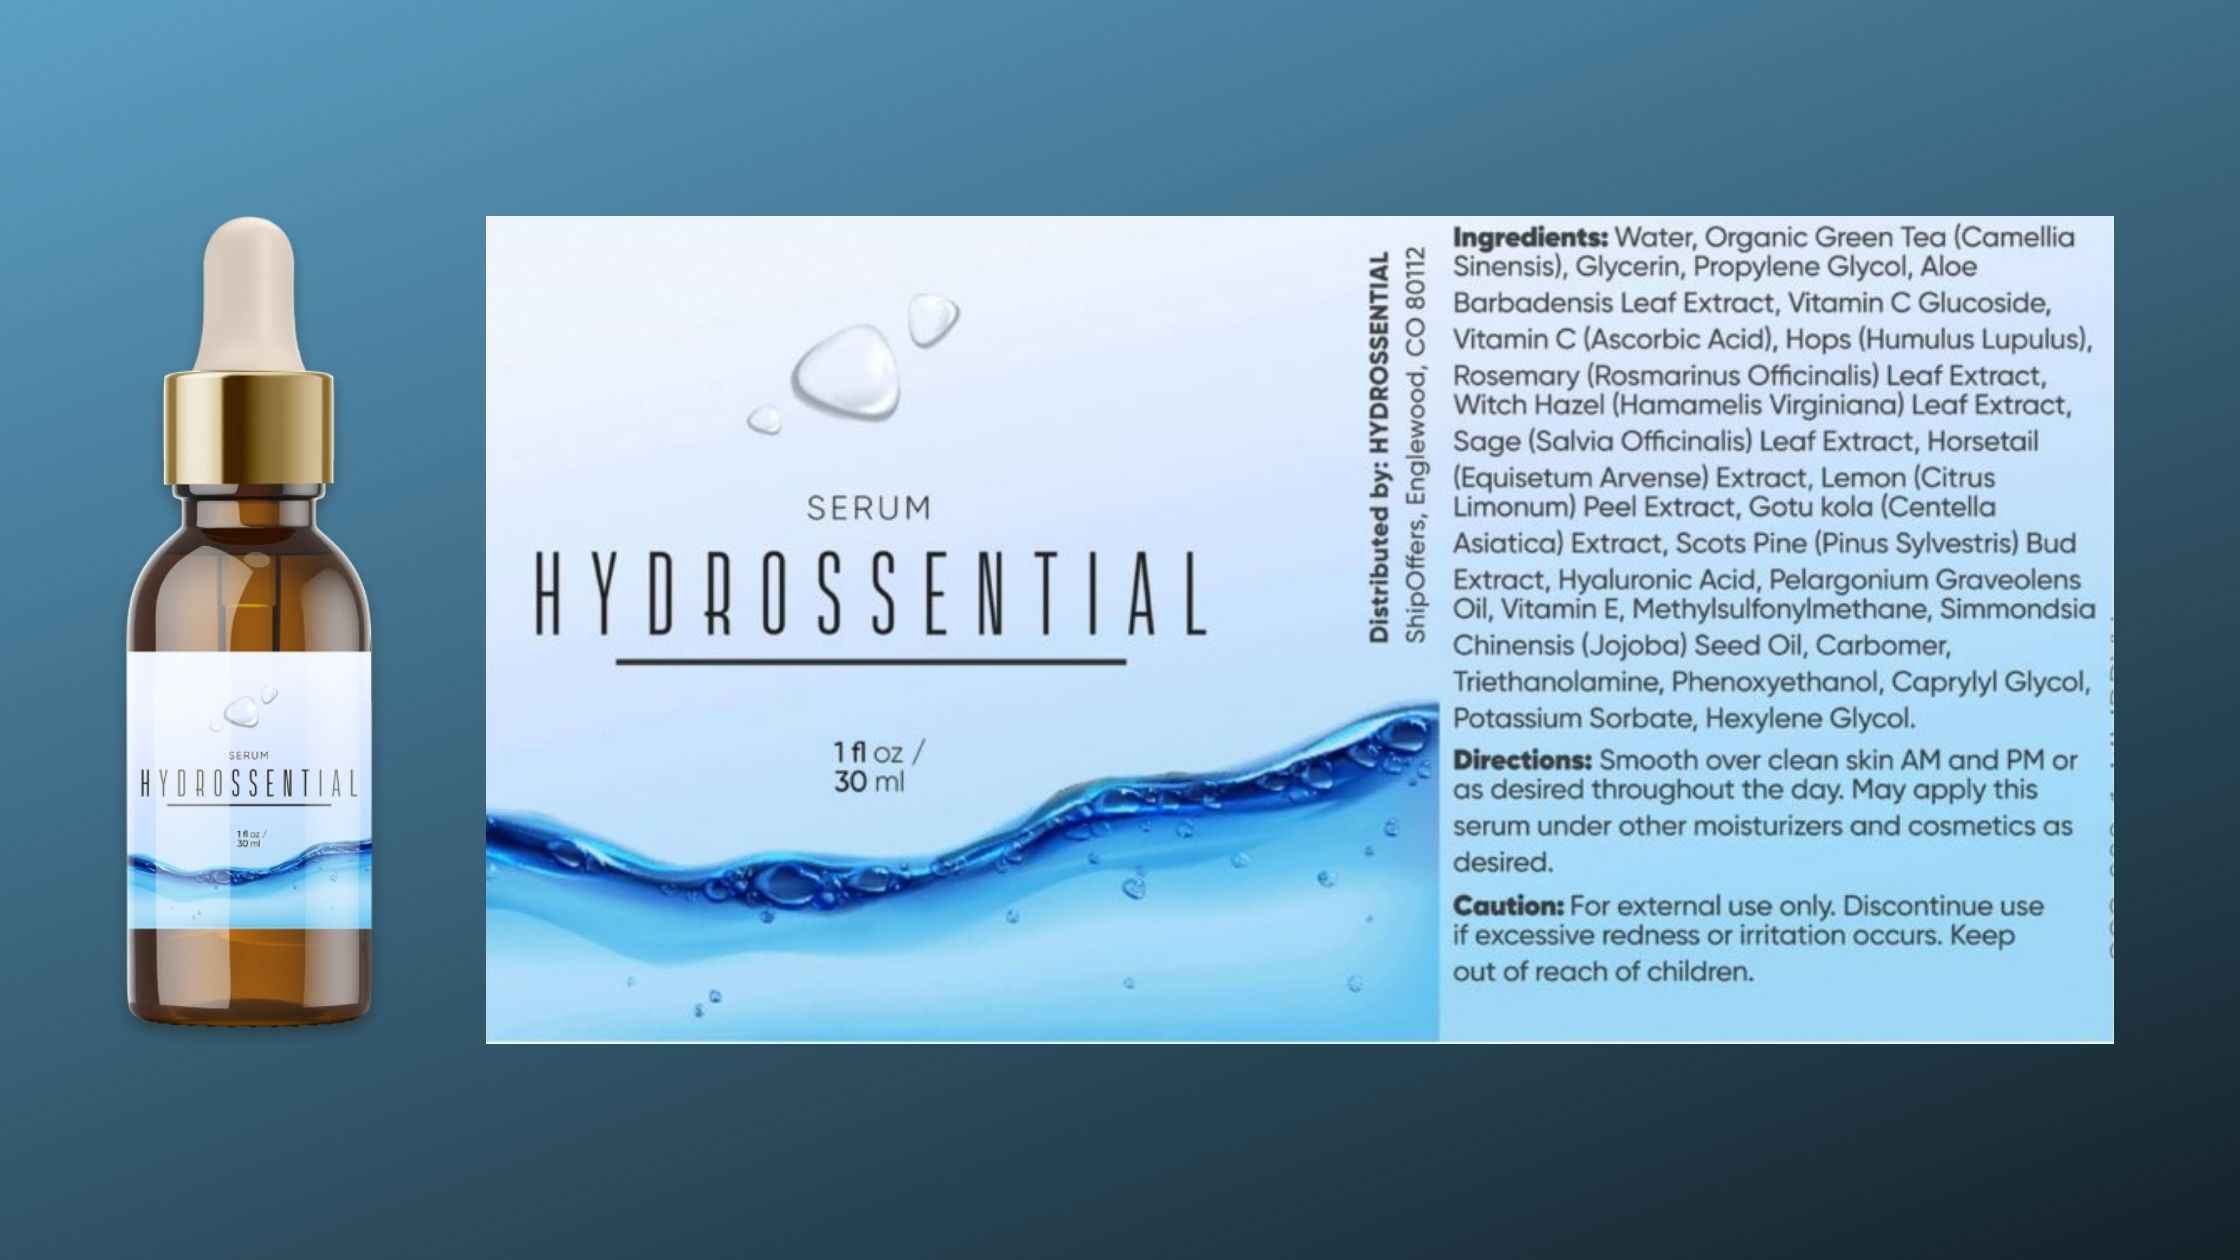 Hydrossential Supplement Fact